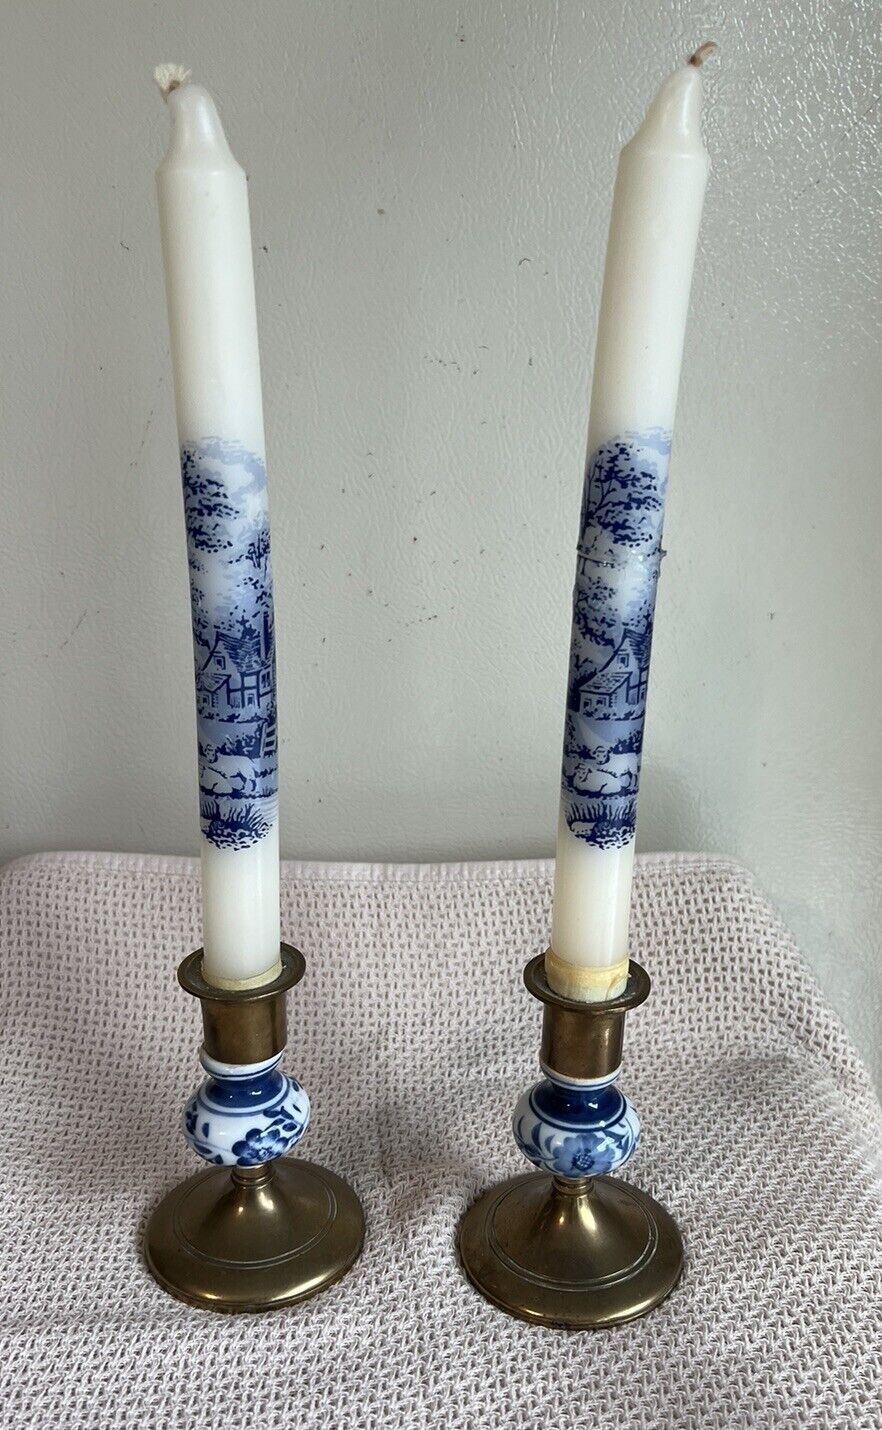 Vintage Delft Style Ceramic And Brass Candlestick Holders W/Delft Holland Candle